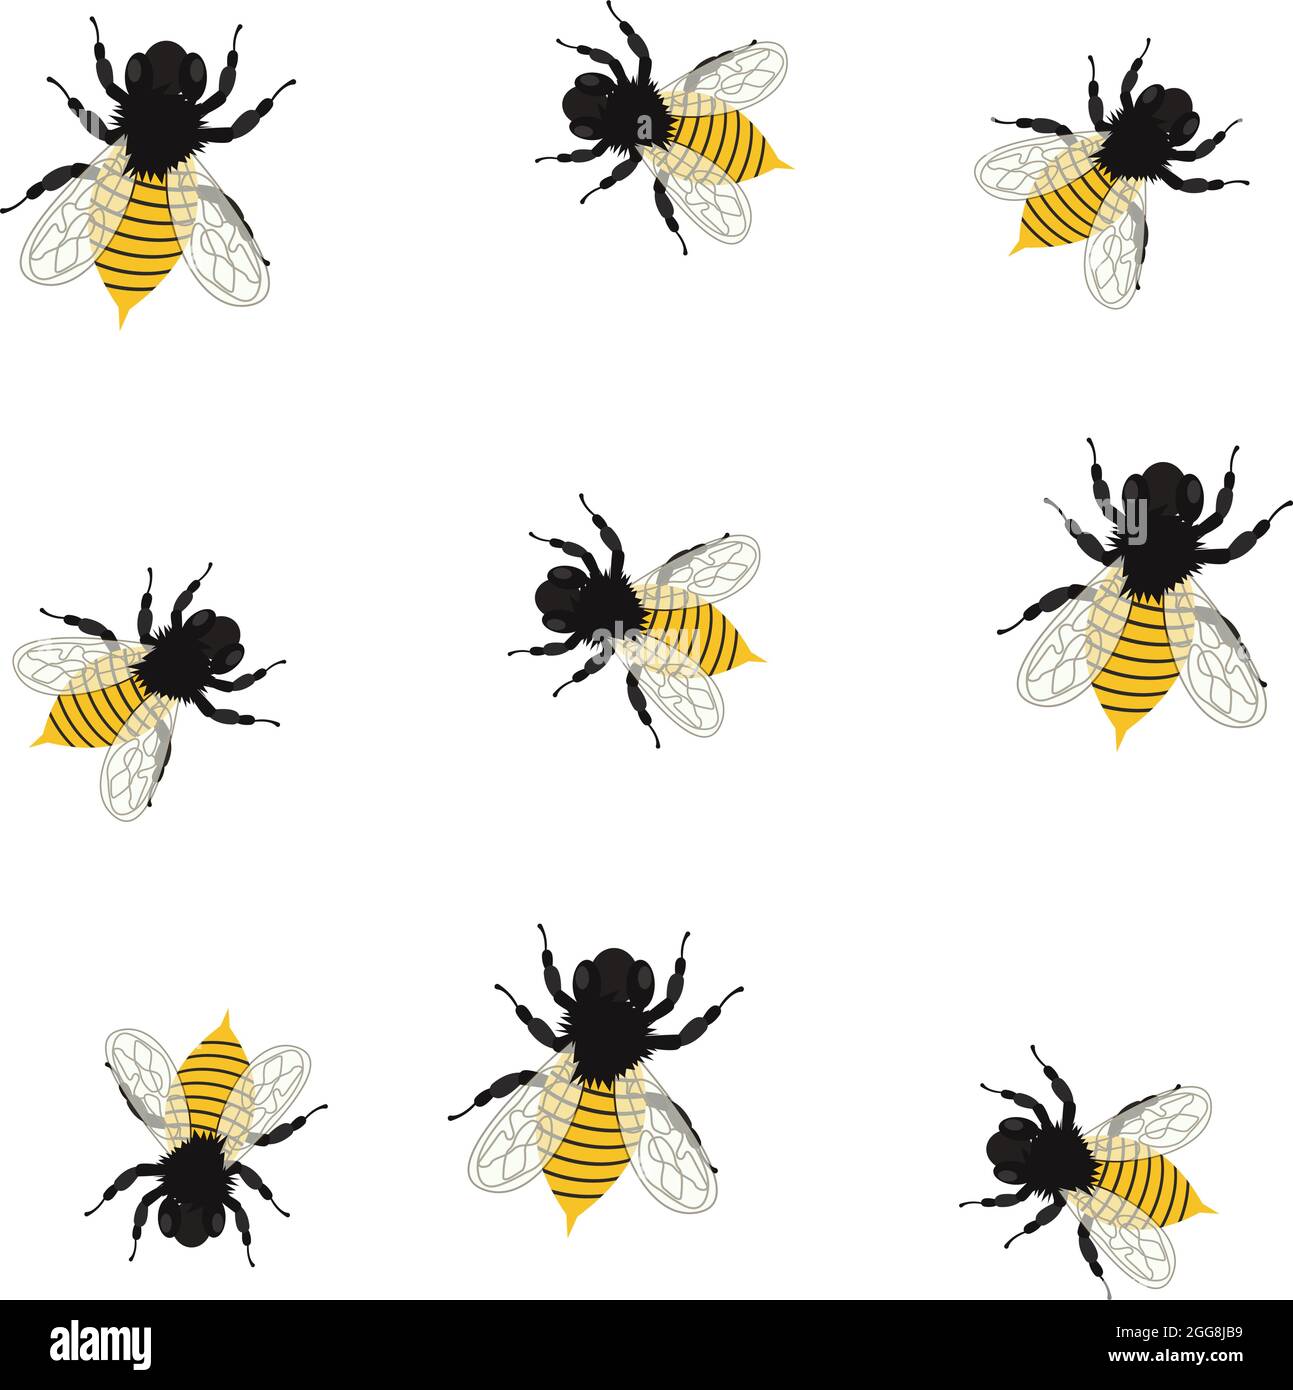 Yellow bees, illustration, vector on a white background. Stock Vector